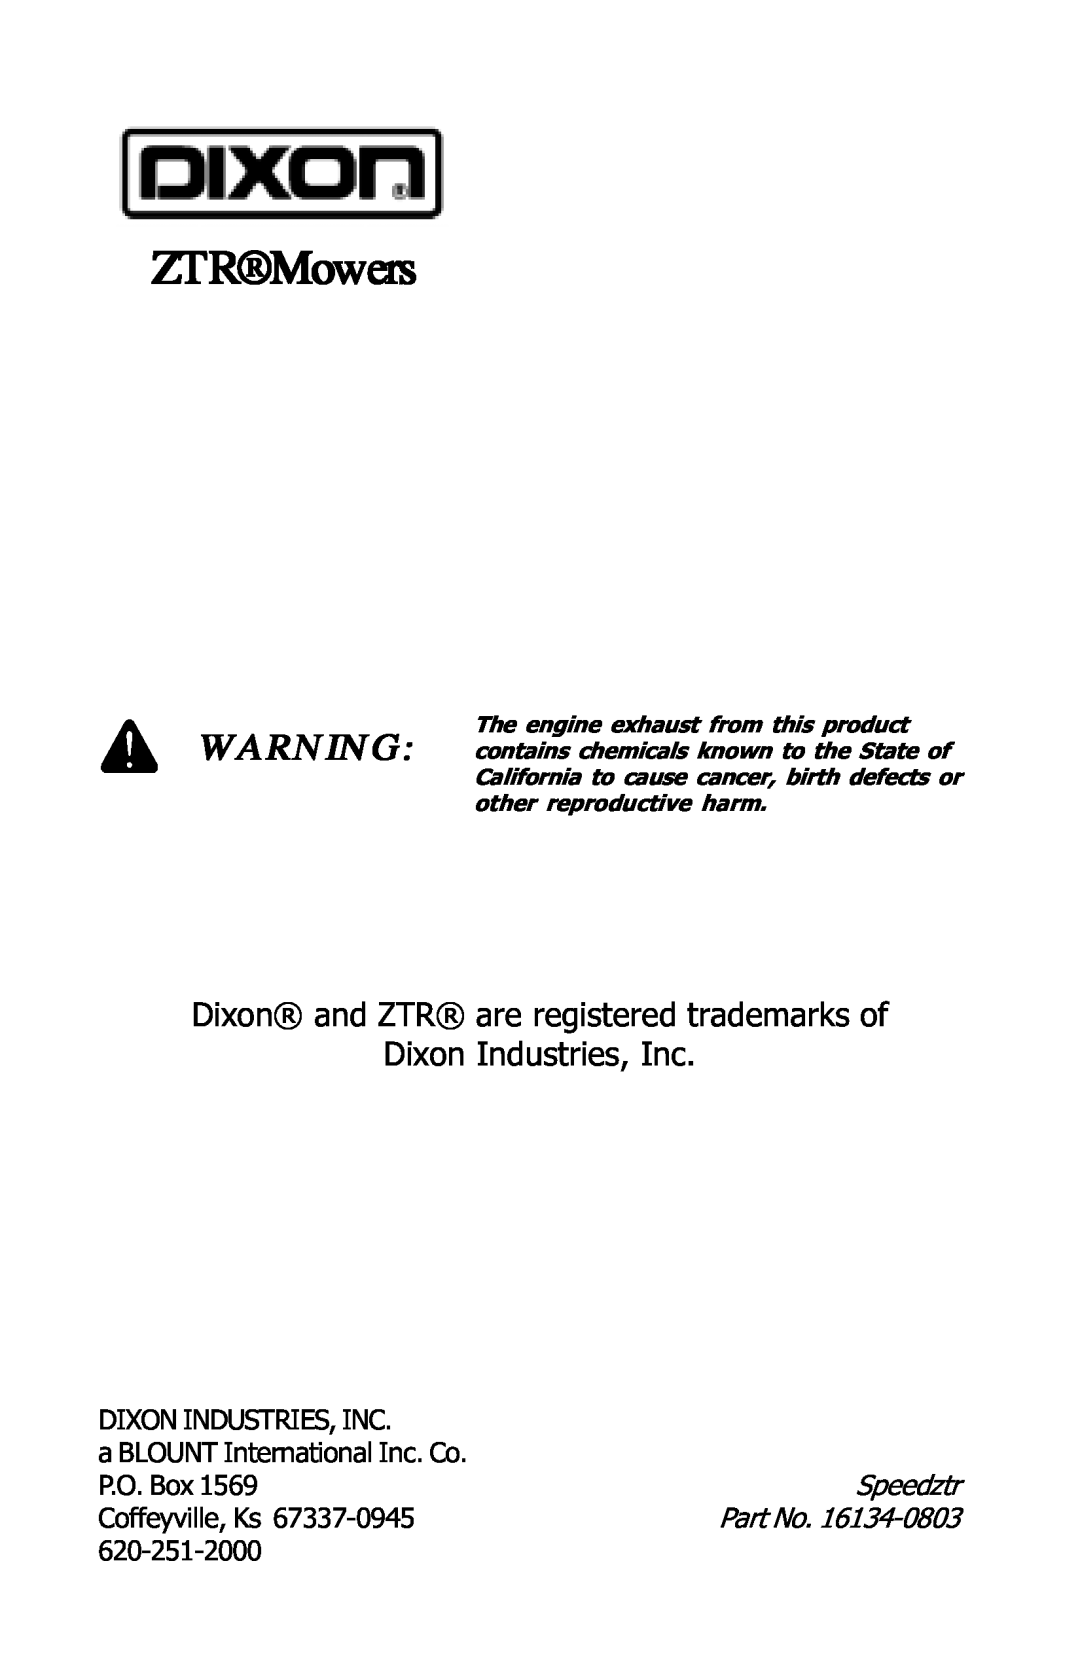 Dixon 16134-0803 manual ZTRMowers, Dixon and ZTR are registered trademarks of Dixon Industries, Inc 